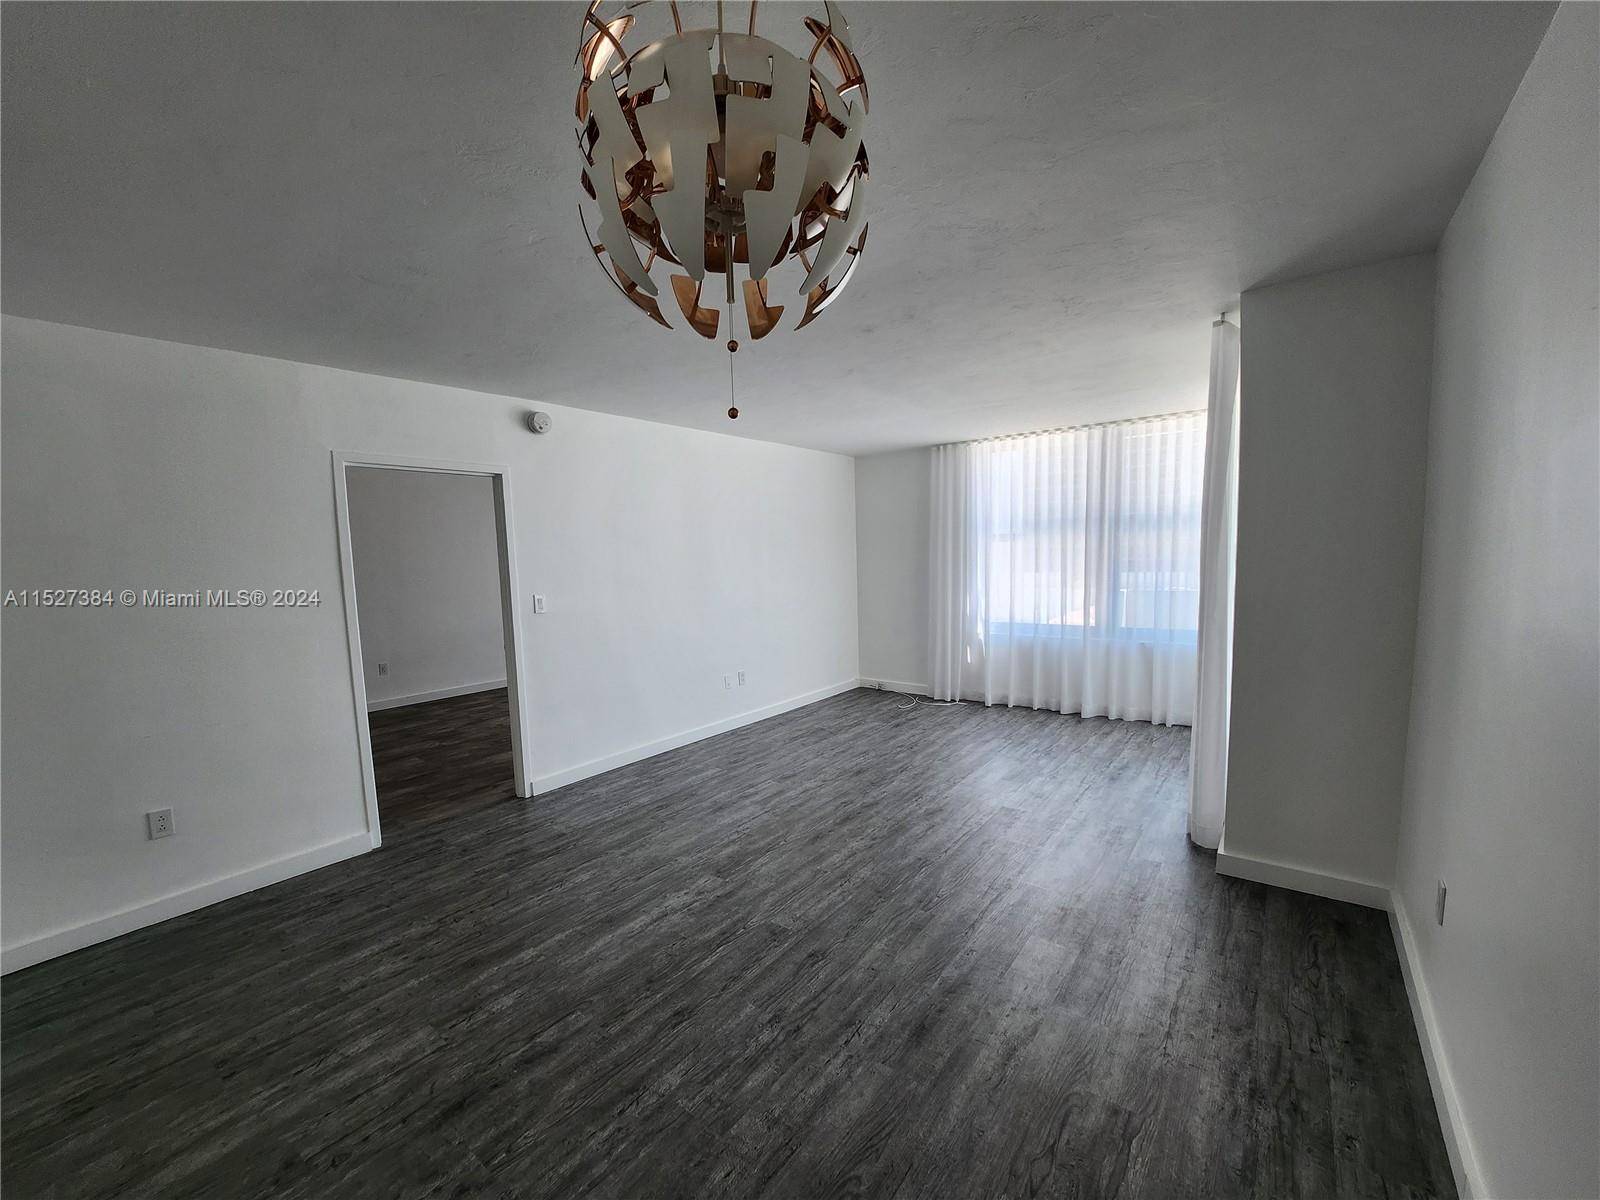 Enjoy this oceanfront building in Miami Beach, unit features stainless steel appliances, vinyl floors thought out the unit, renovated bathrooms, customized closet with plenty of space and spacious balcony, building ...